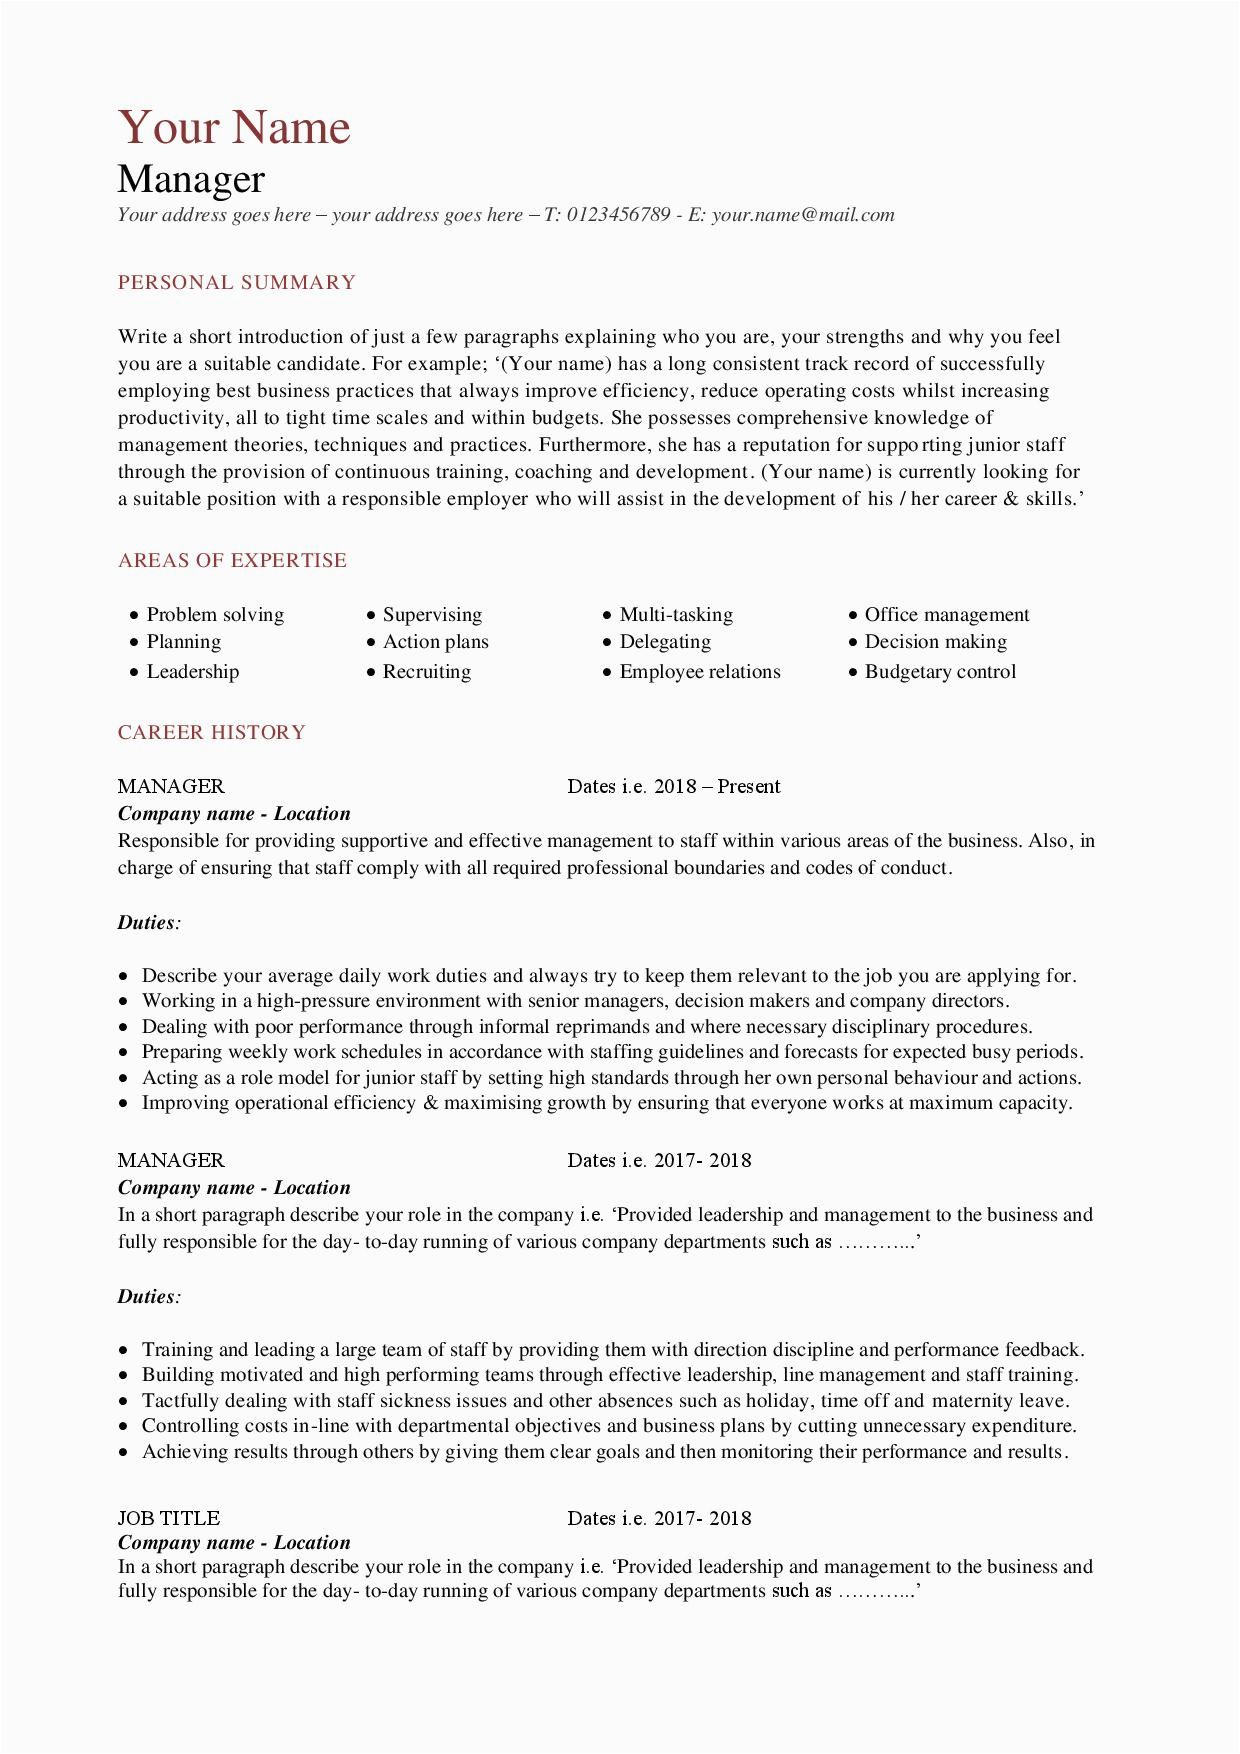 Resume Template for someone who Has Never Worked Resume Template for someone who Has Never Worked